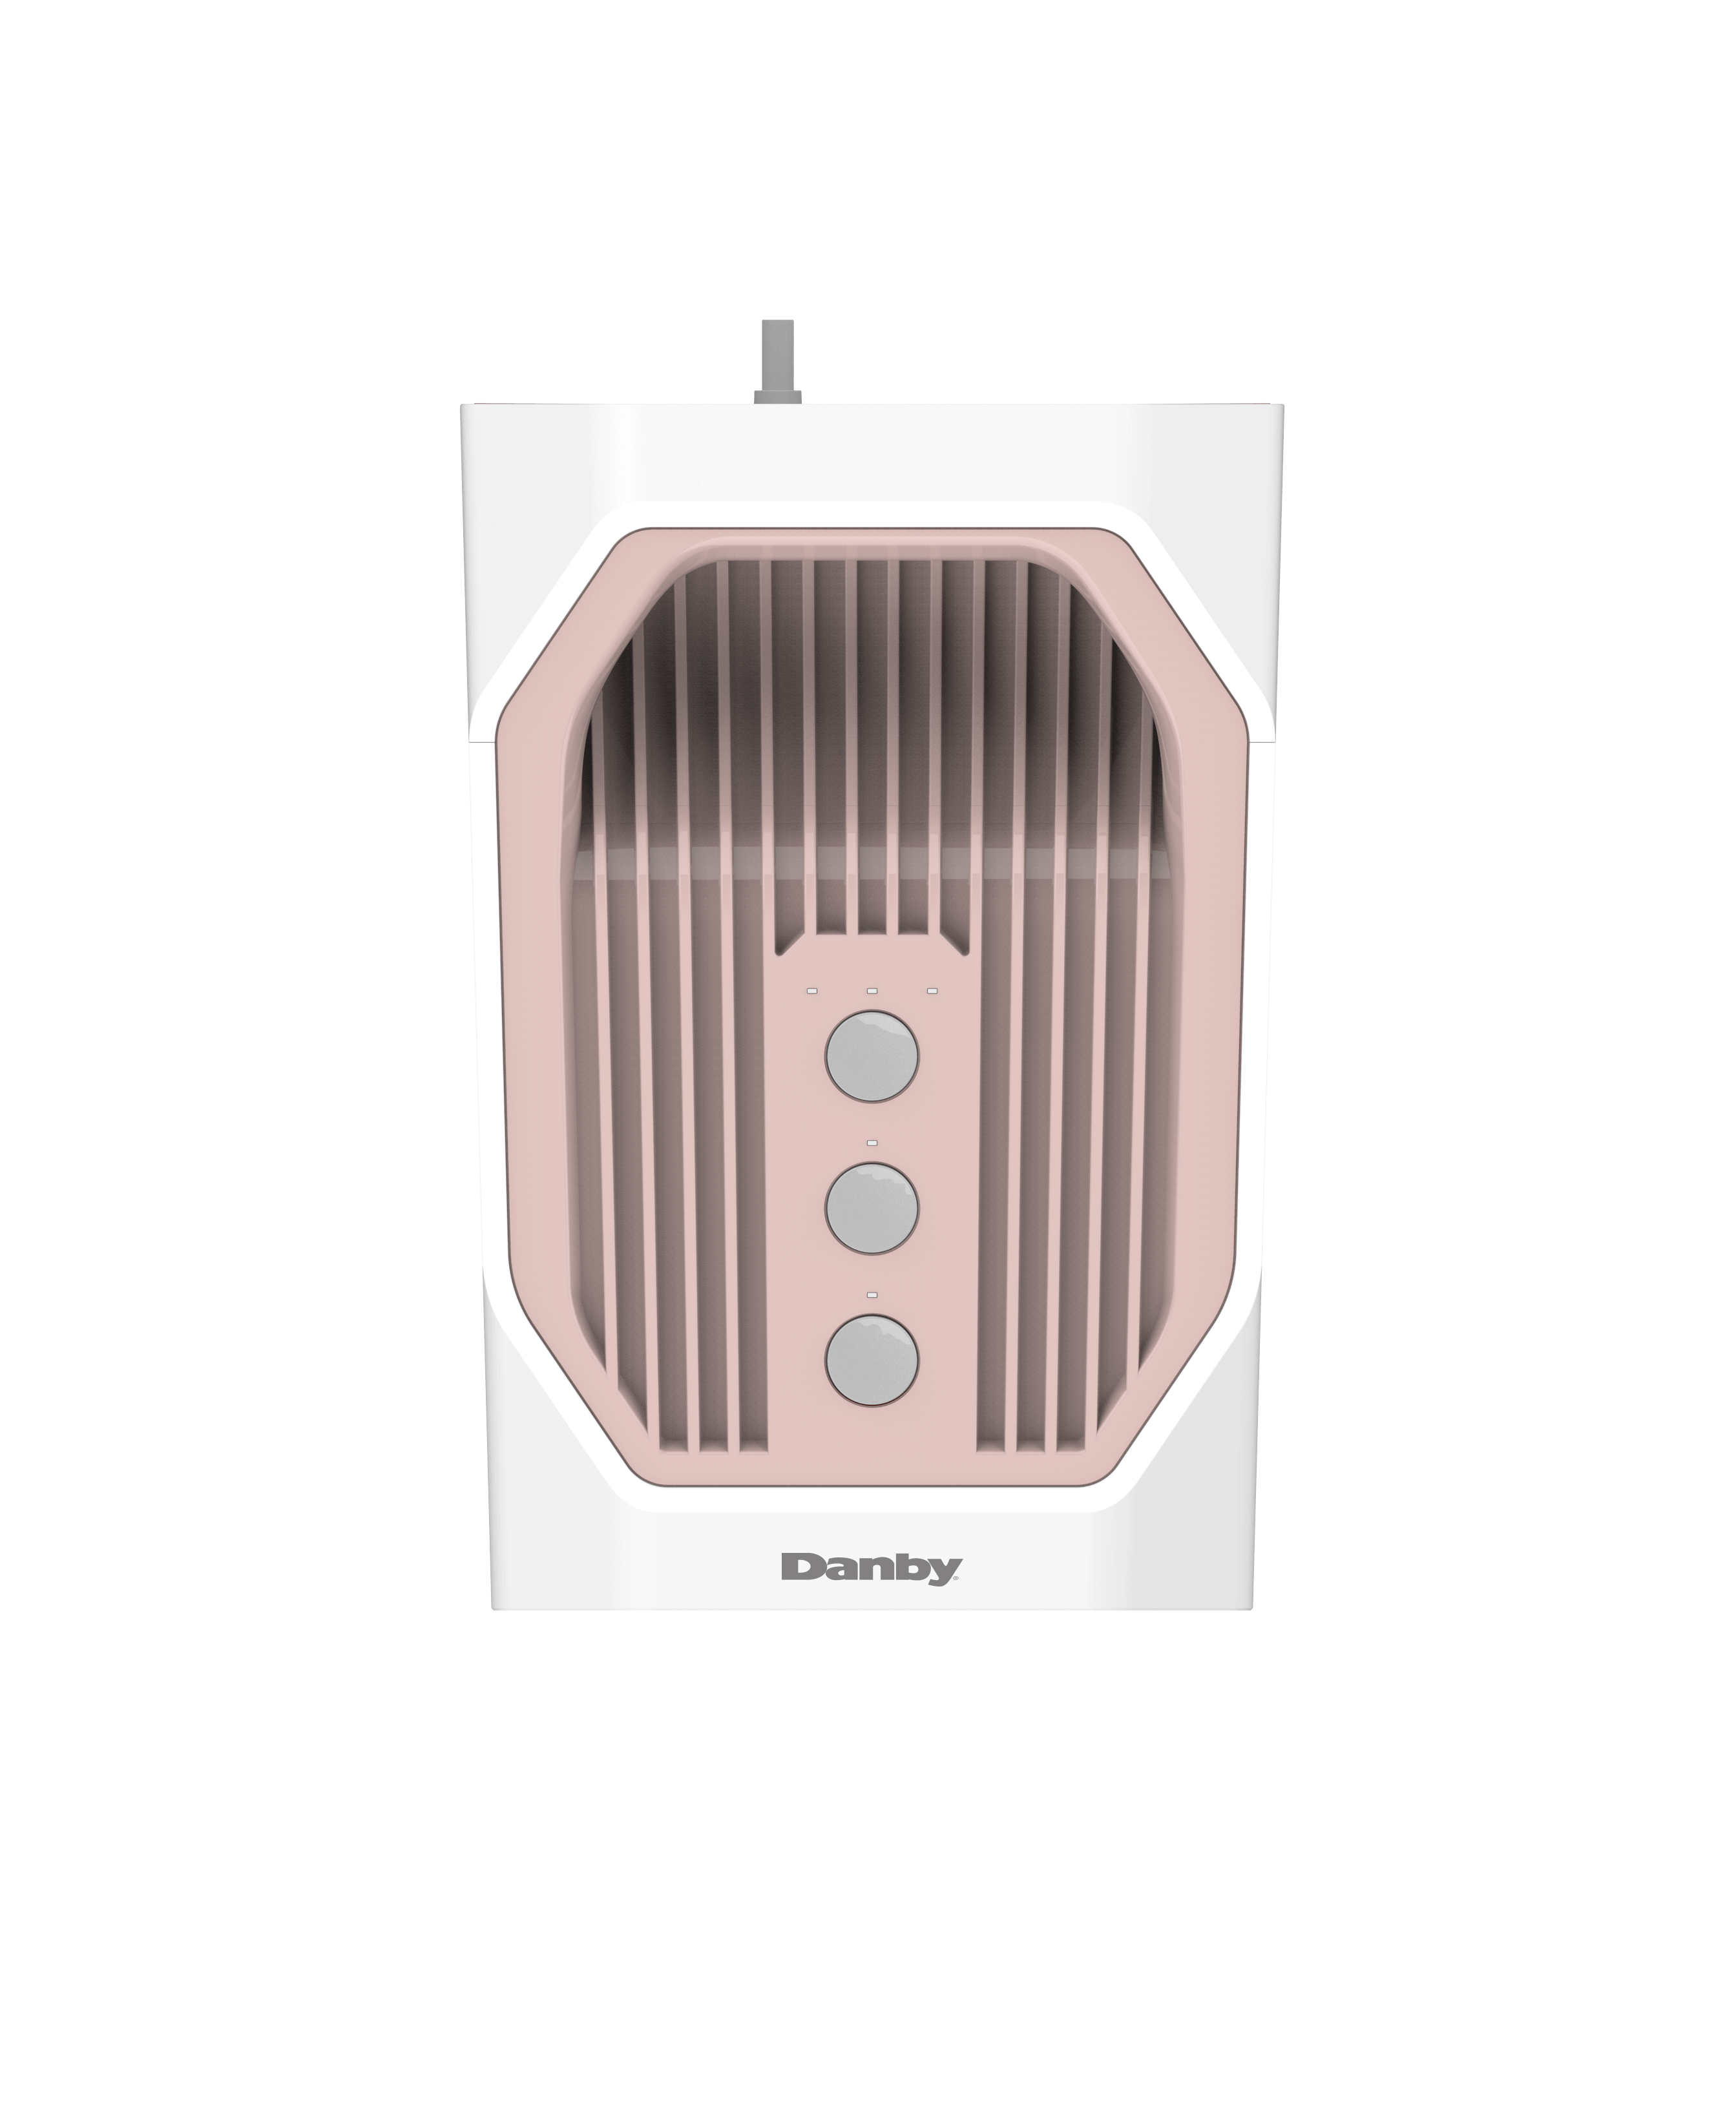 Danby Air Purifier up to 222 sq.ft